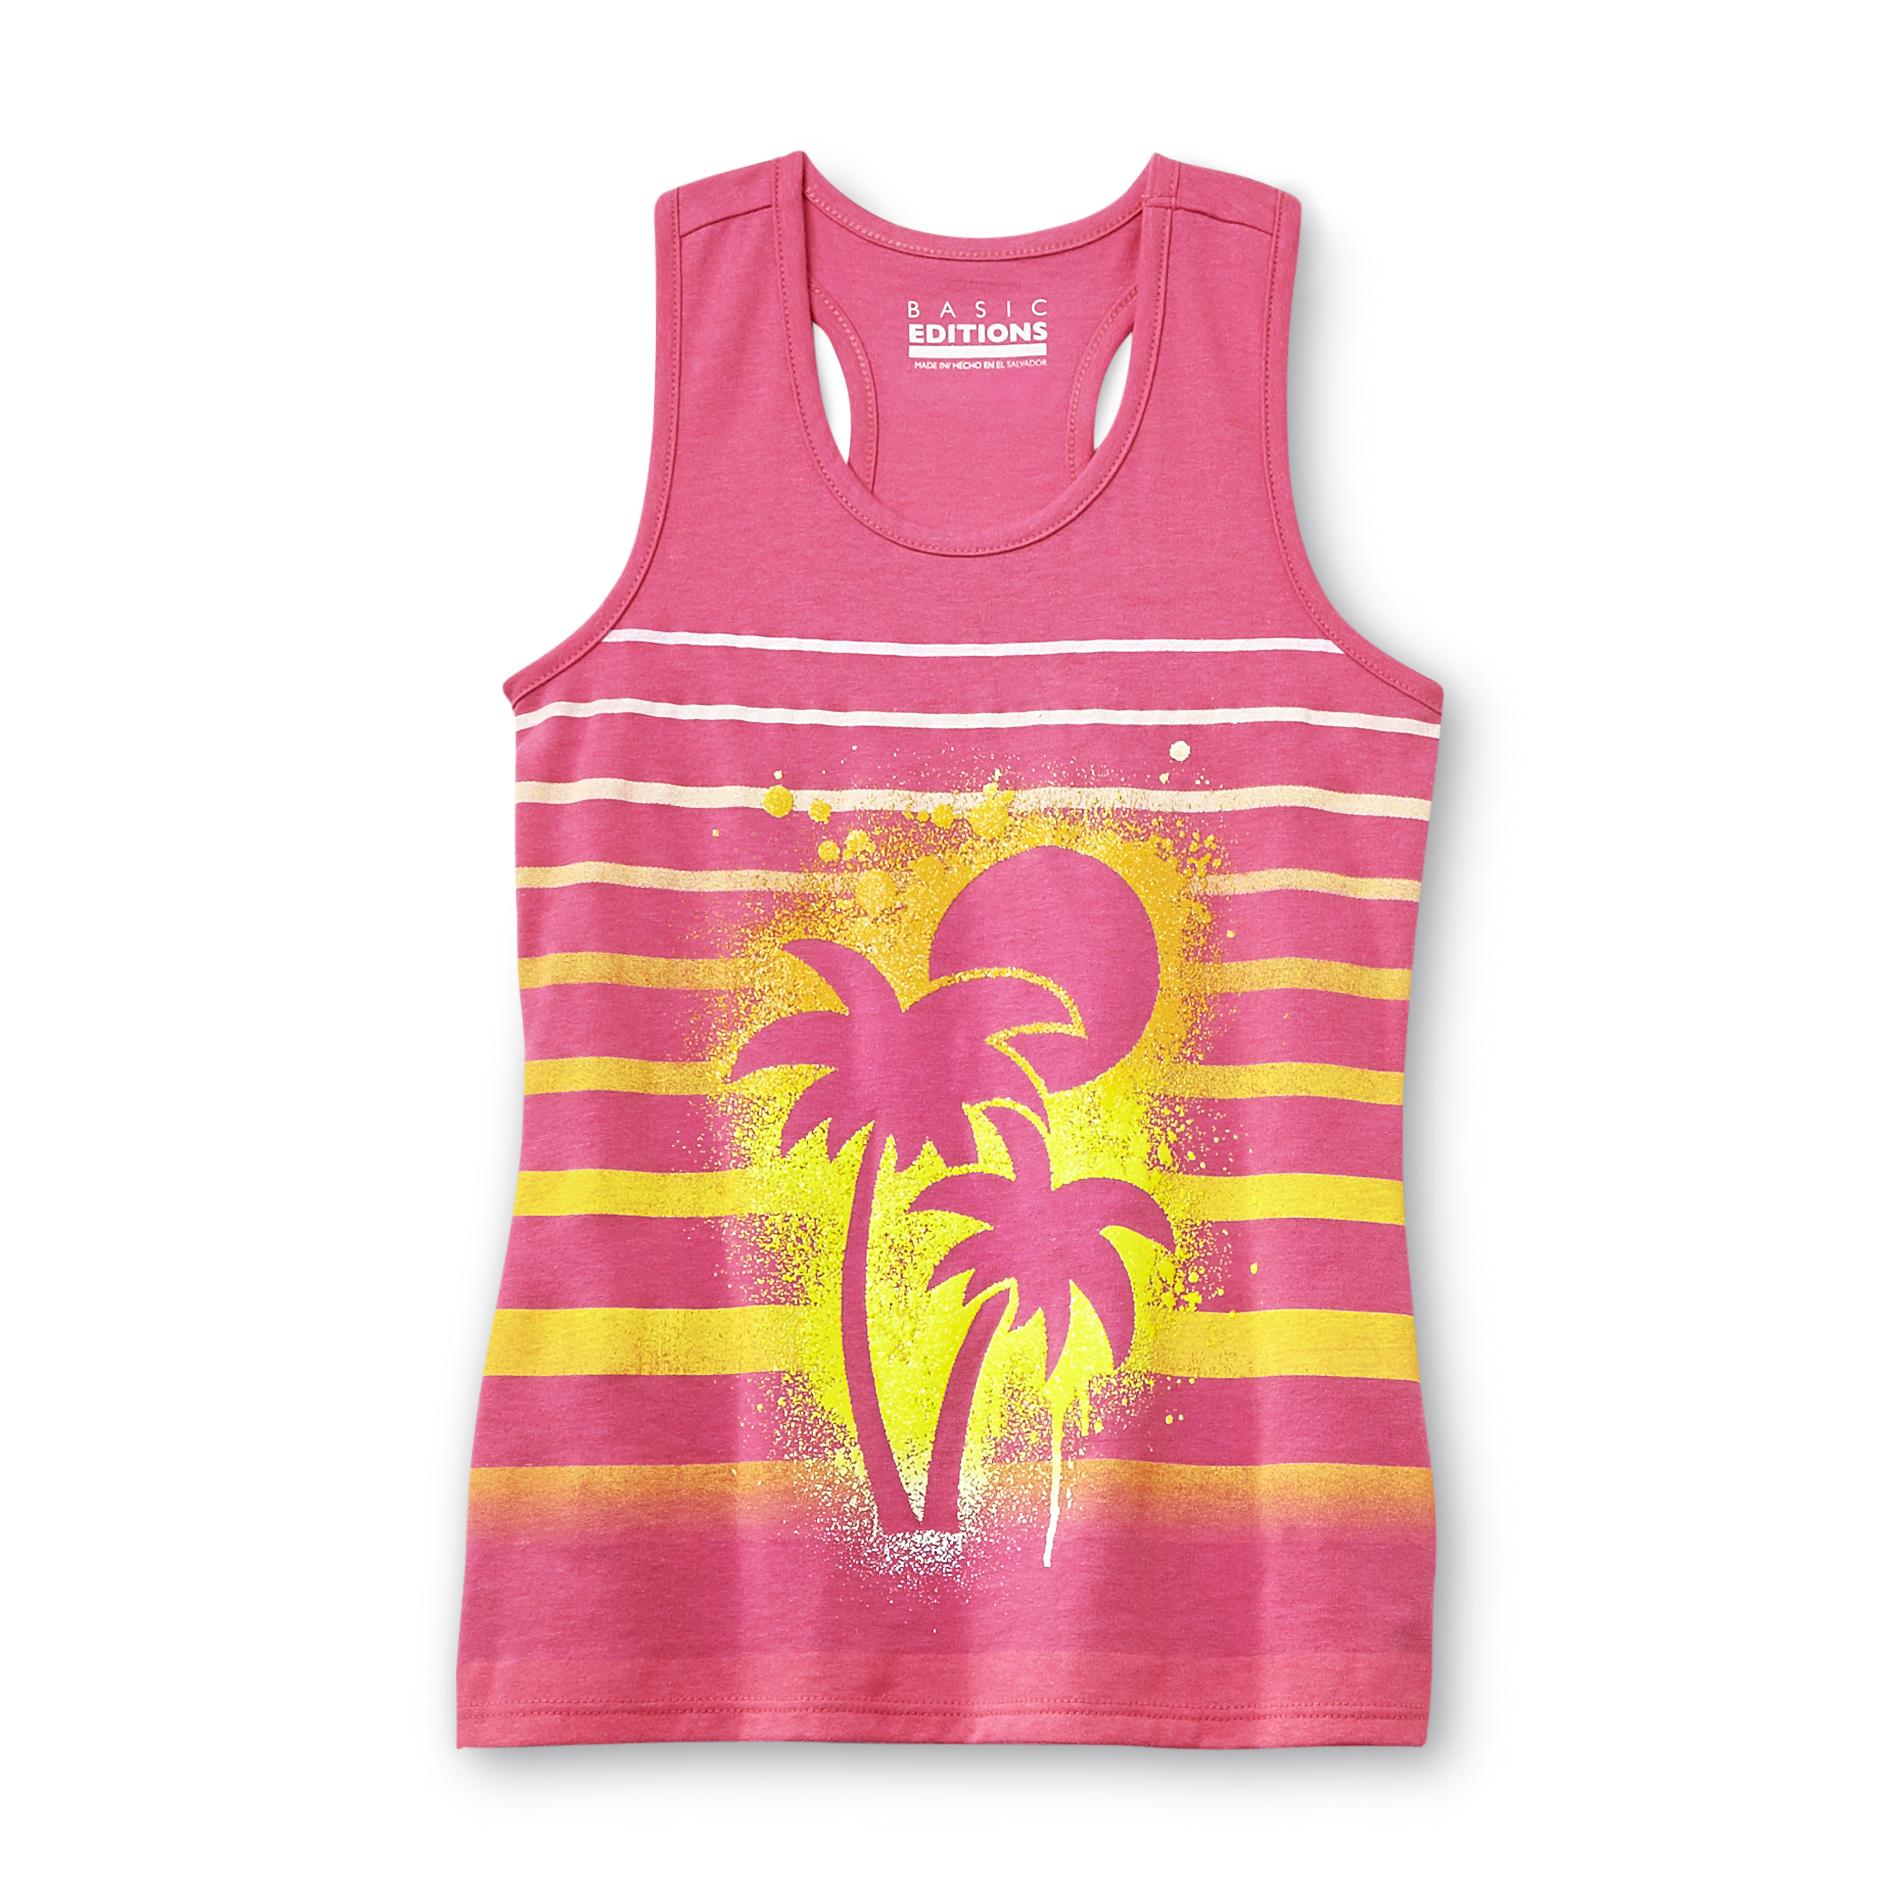 Basic Editions Girl's Sparkle Tank Top - Palm Trees